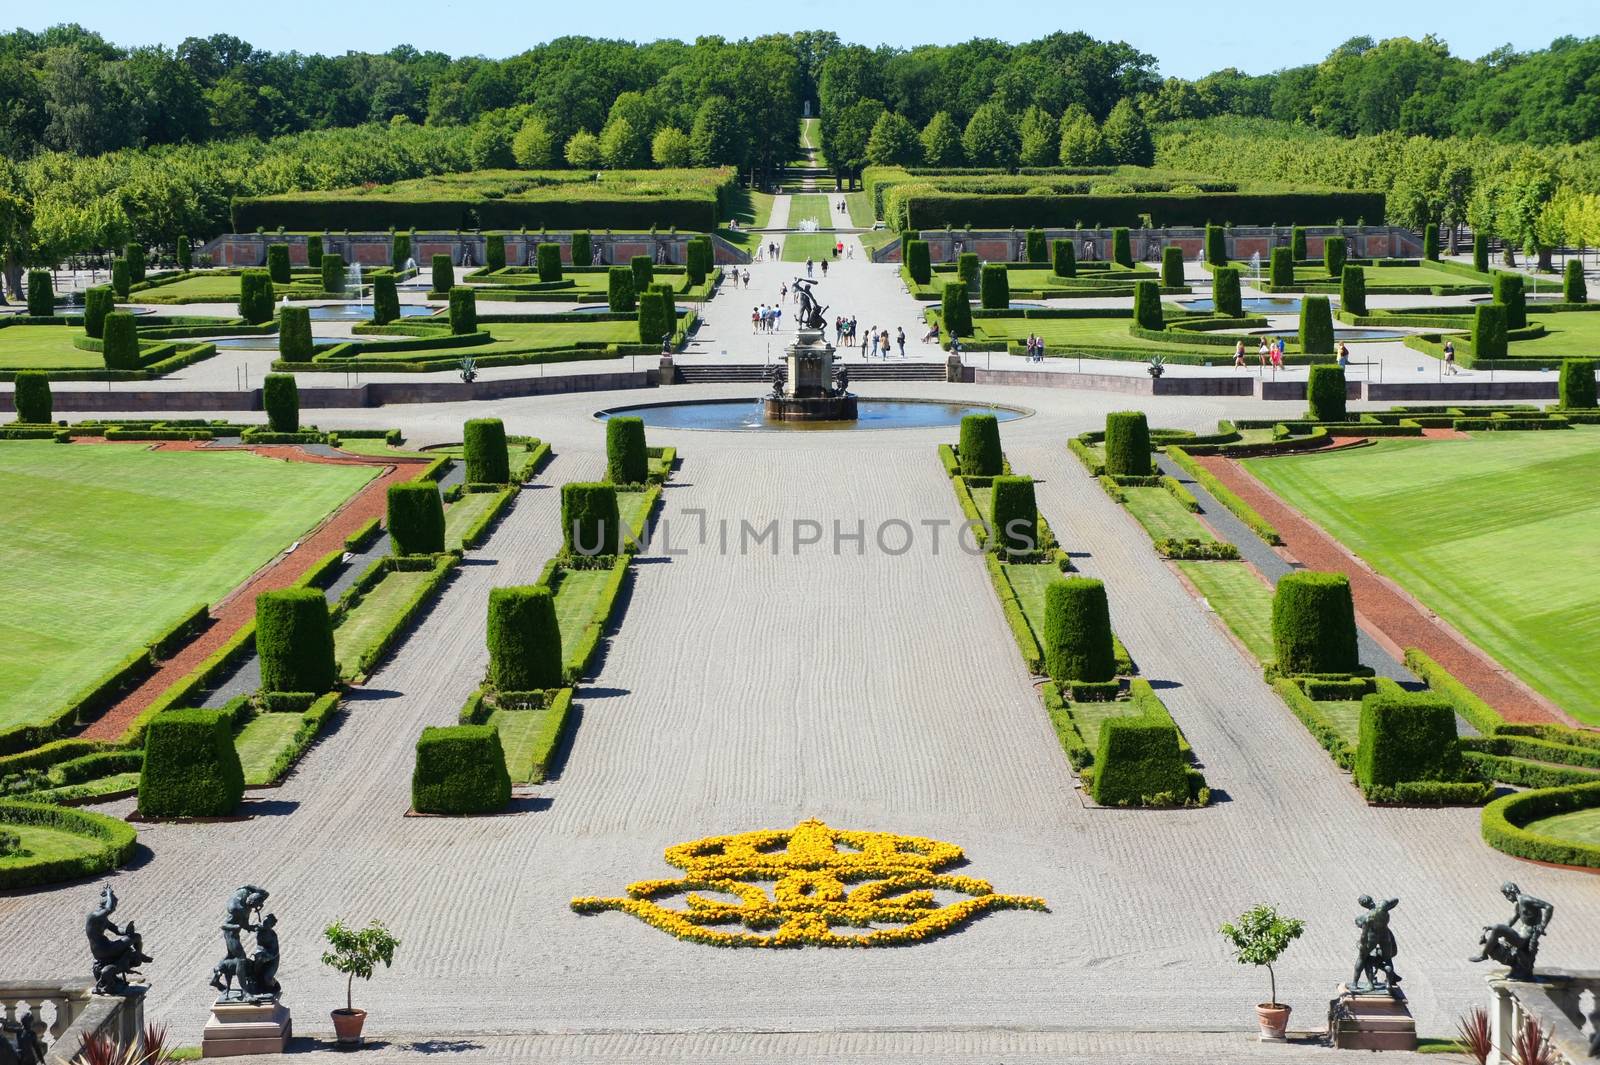 Gardens of Drottningholm Palace, originally built in the 16th century, one of Sweden's most popular tourist attractions